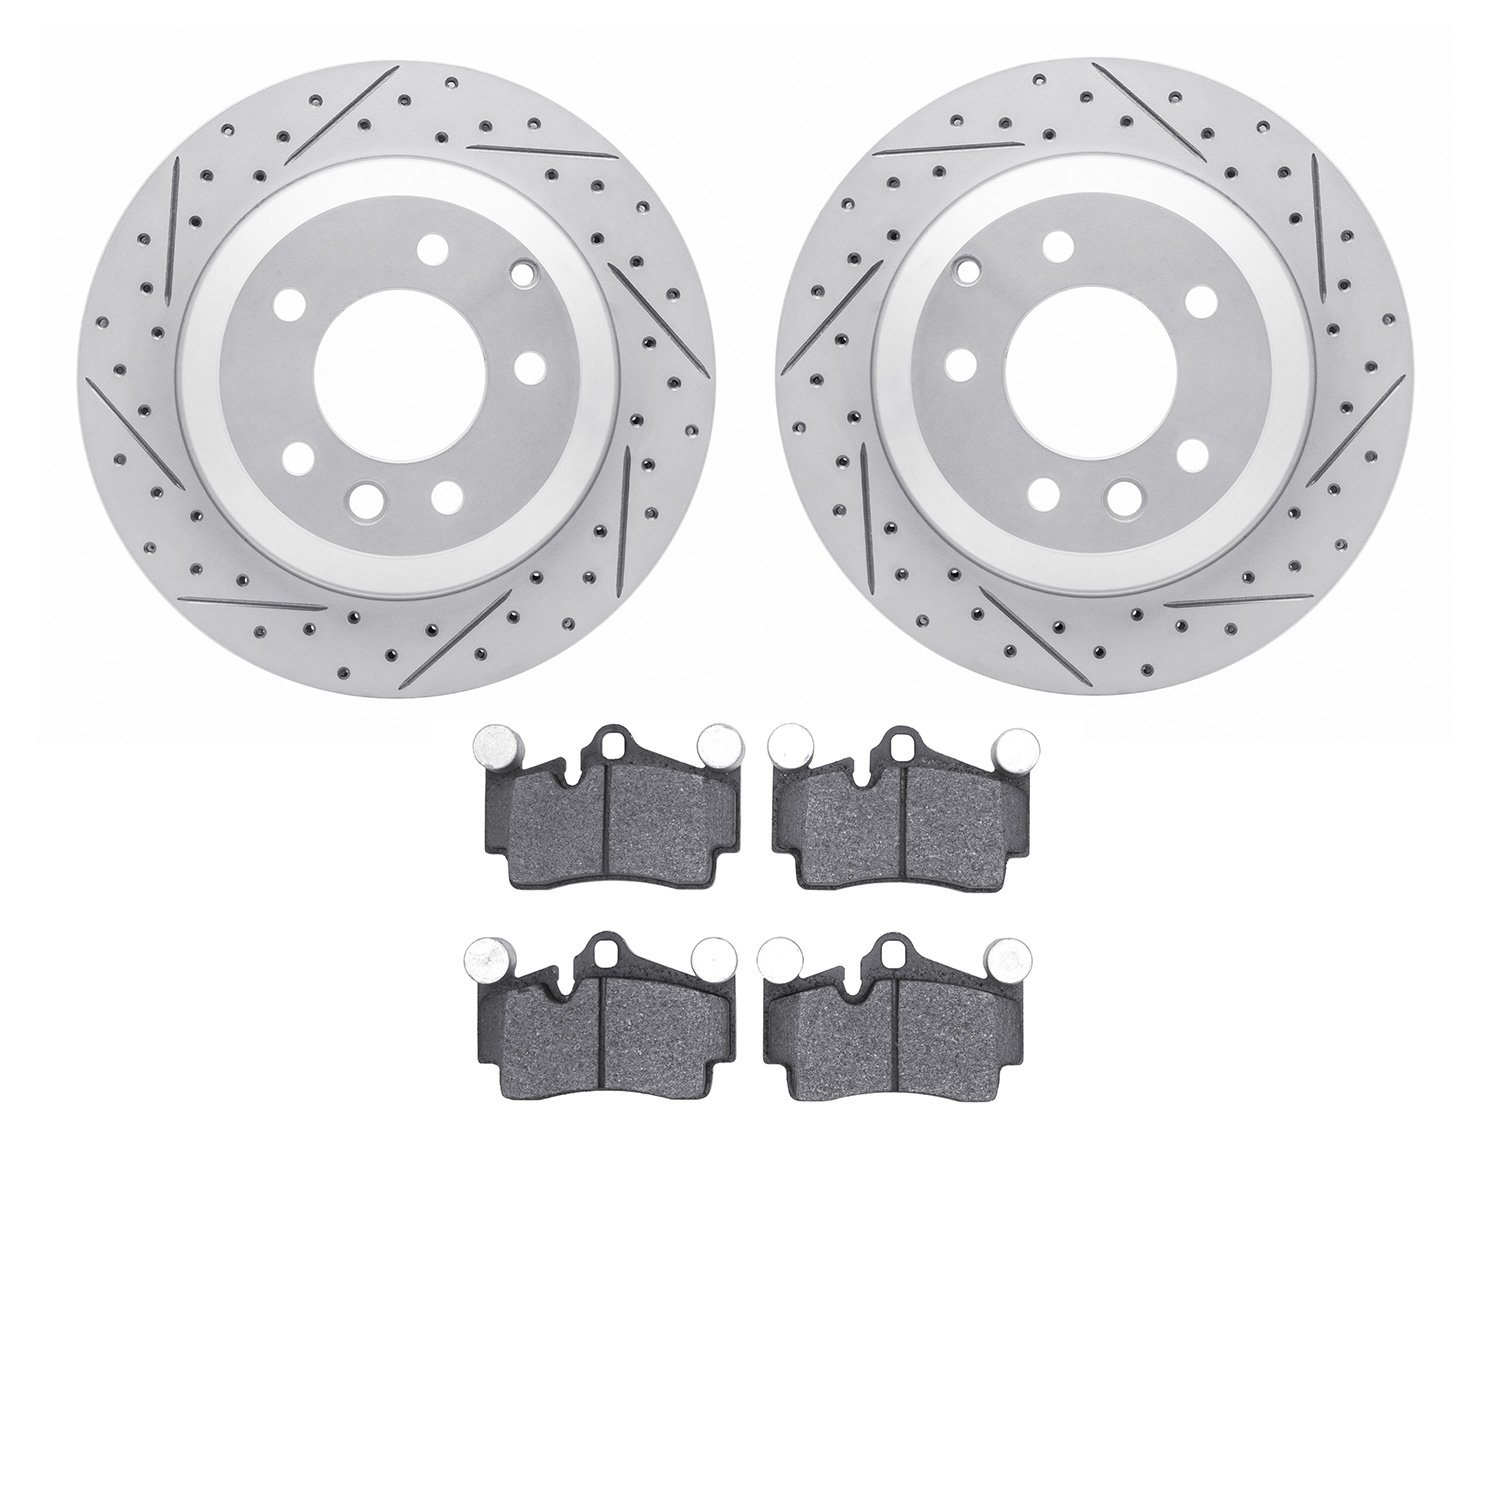 2502-74062 Geoperformance Drilled/Slotted Rotors w/5000 Advanced Brake Pads Kit, 2003-2015 Multiple Makes/Models, Position: Rear